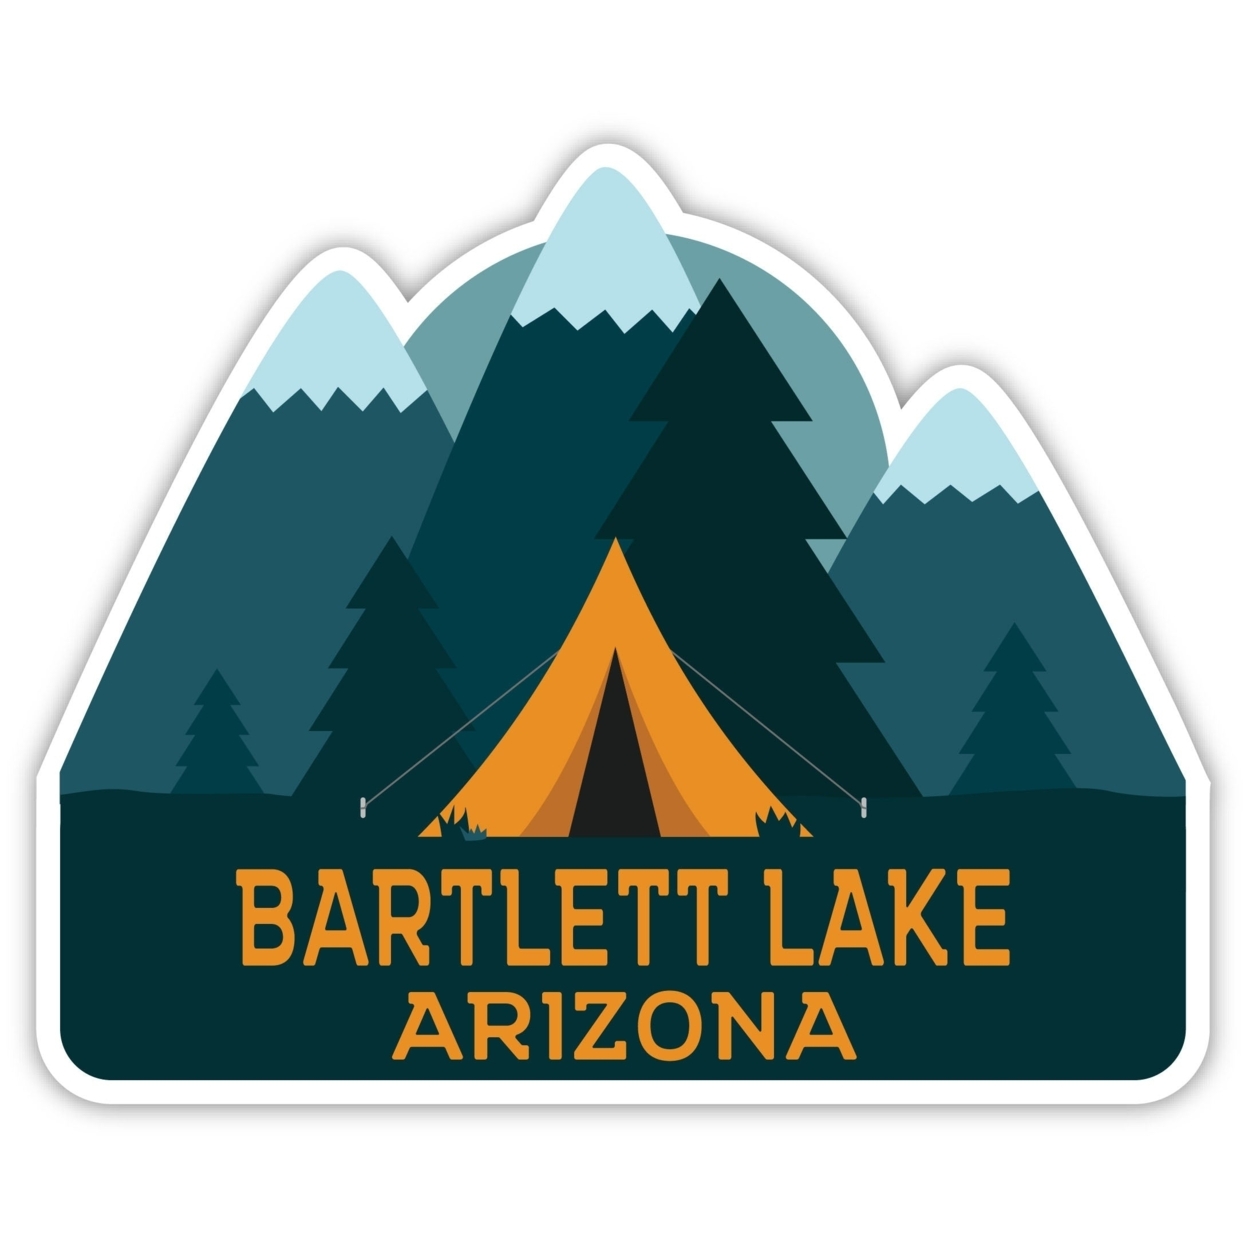 Bartlett Lake Arizona Souvenir Decorative Stickers (Choose Theme And Size) - 4-Pack, 2-Inch, Great Outdoors